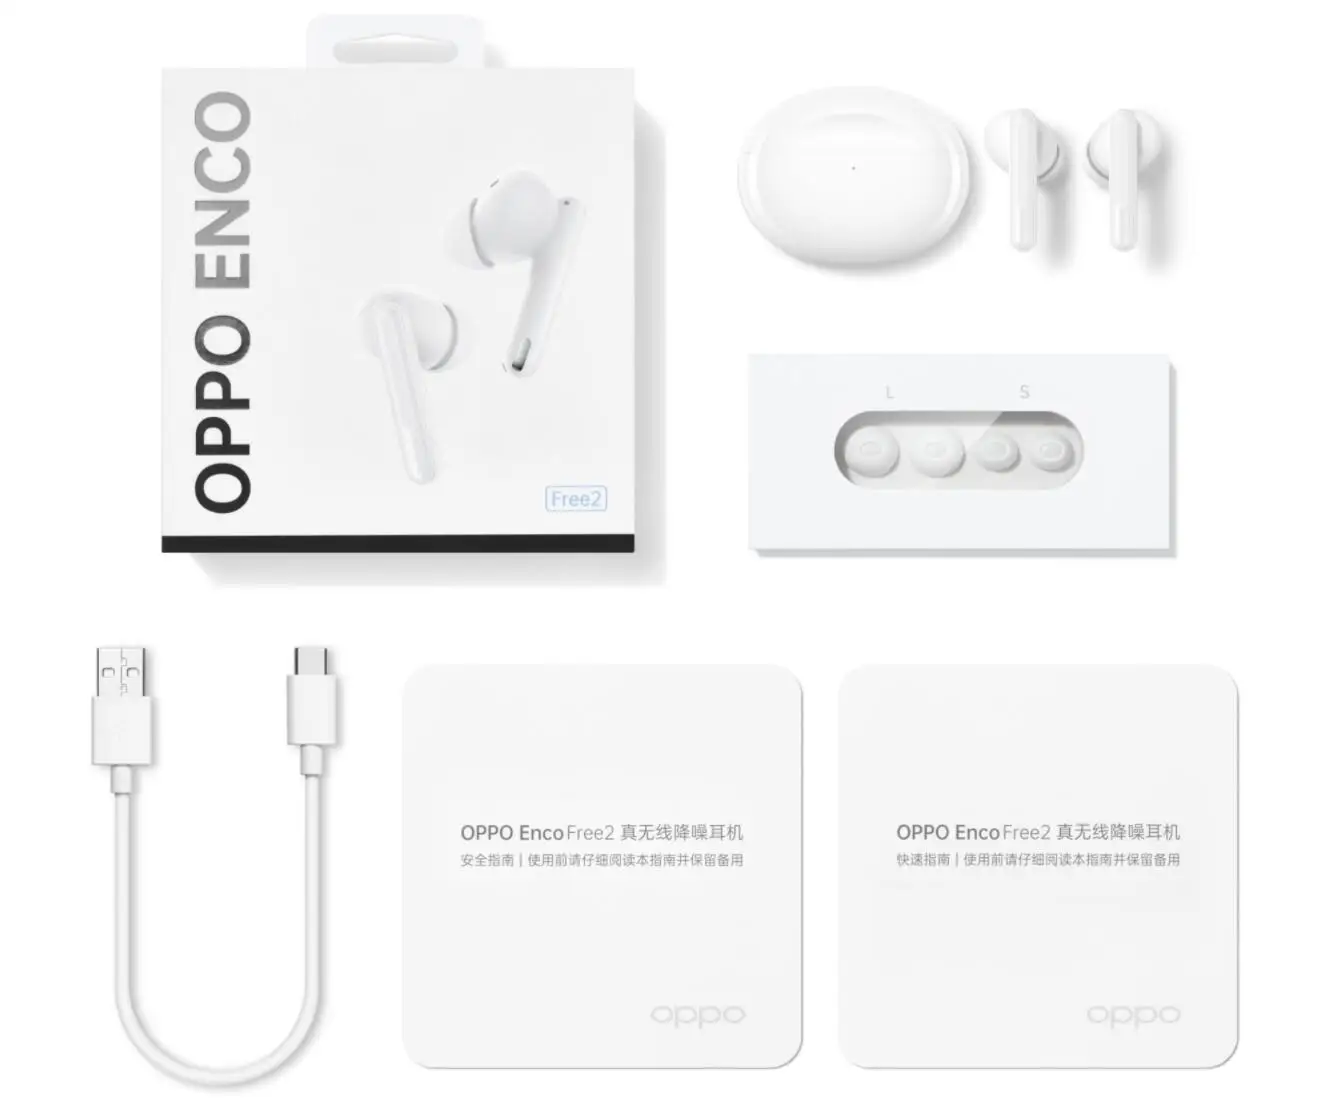 original oppo enco free 2 free2 accessories left earphone right earphone charge box separate replacement parts free global shipping